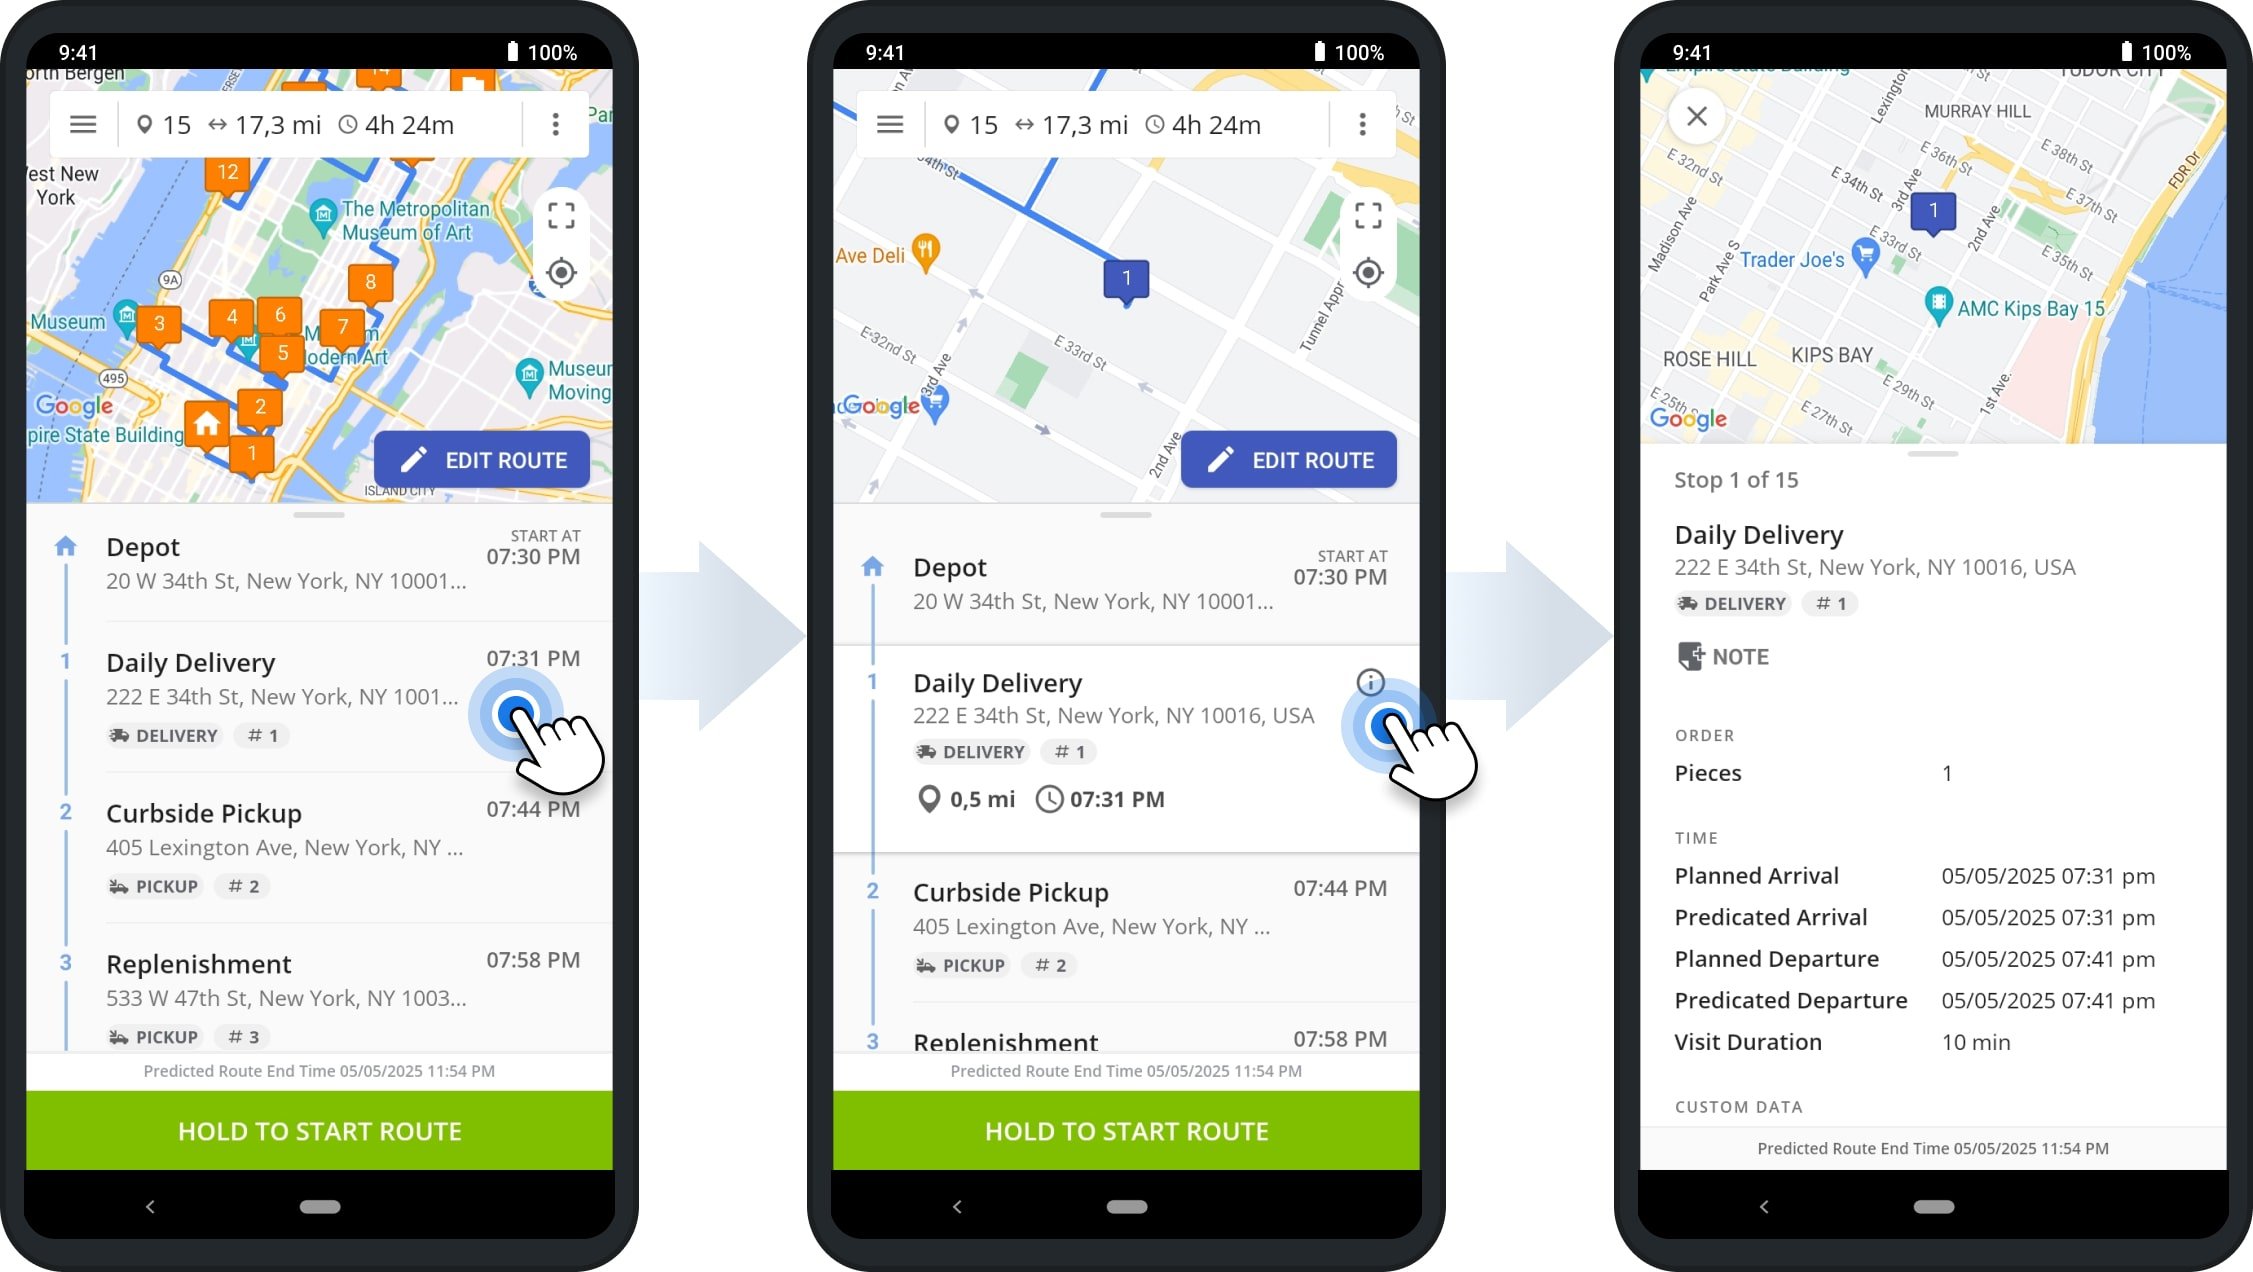 To view Service Time on the mobile Route Planner App, open the route, tap the preferred destination, and then tap the Information Icon to open the Destination Info.